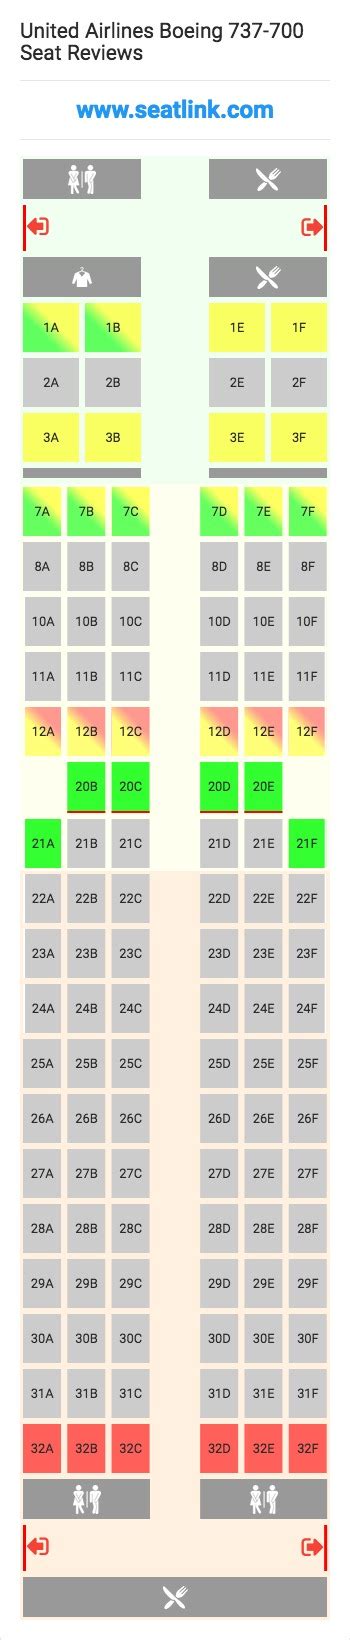 United Airlines Boeing 737 700 Seating Chart Updated July 2022 Seatlink